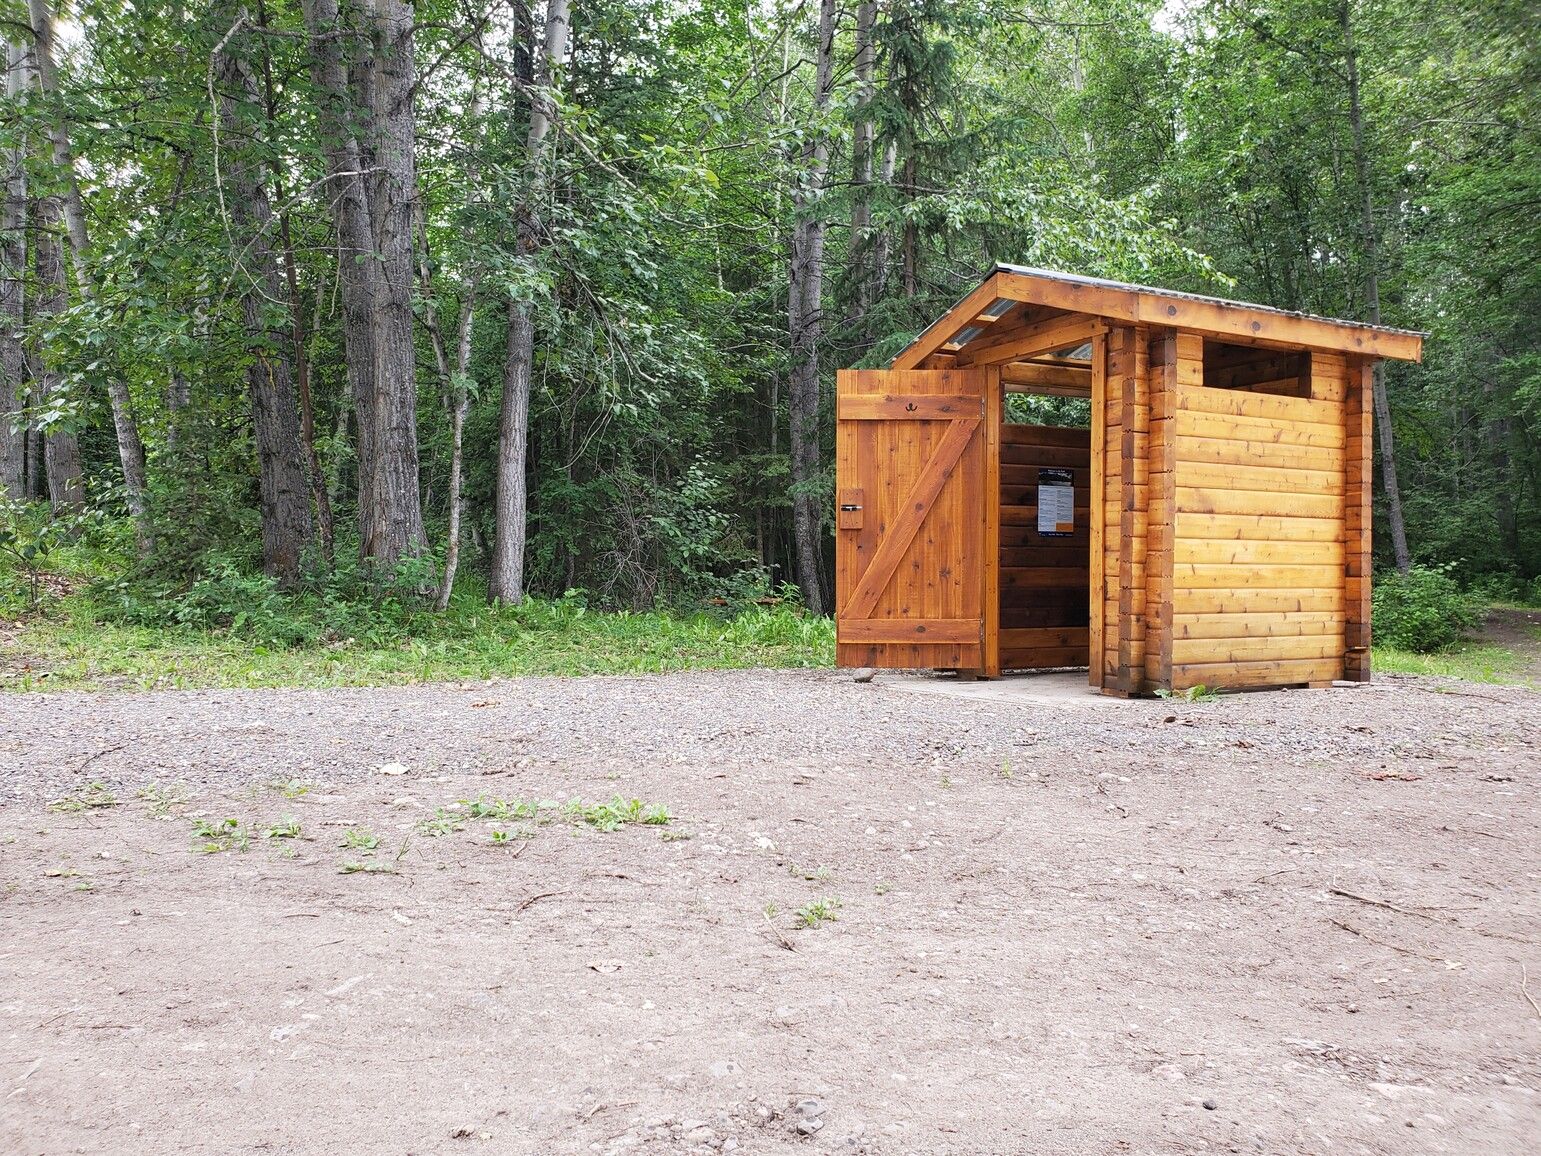 Newly installed outhouse at Sawmill Point, Francois Lake Park.